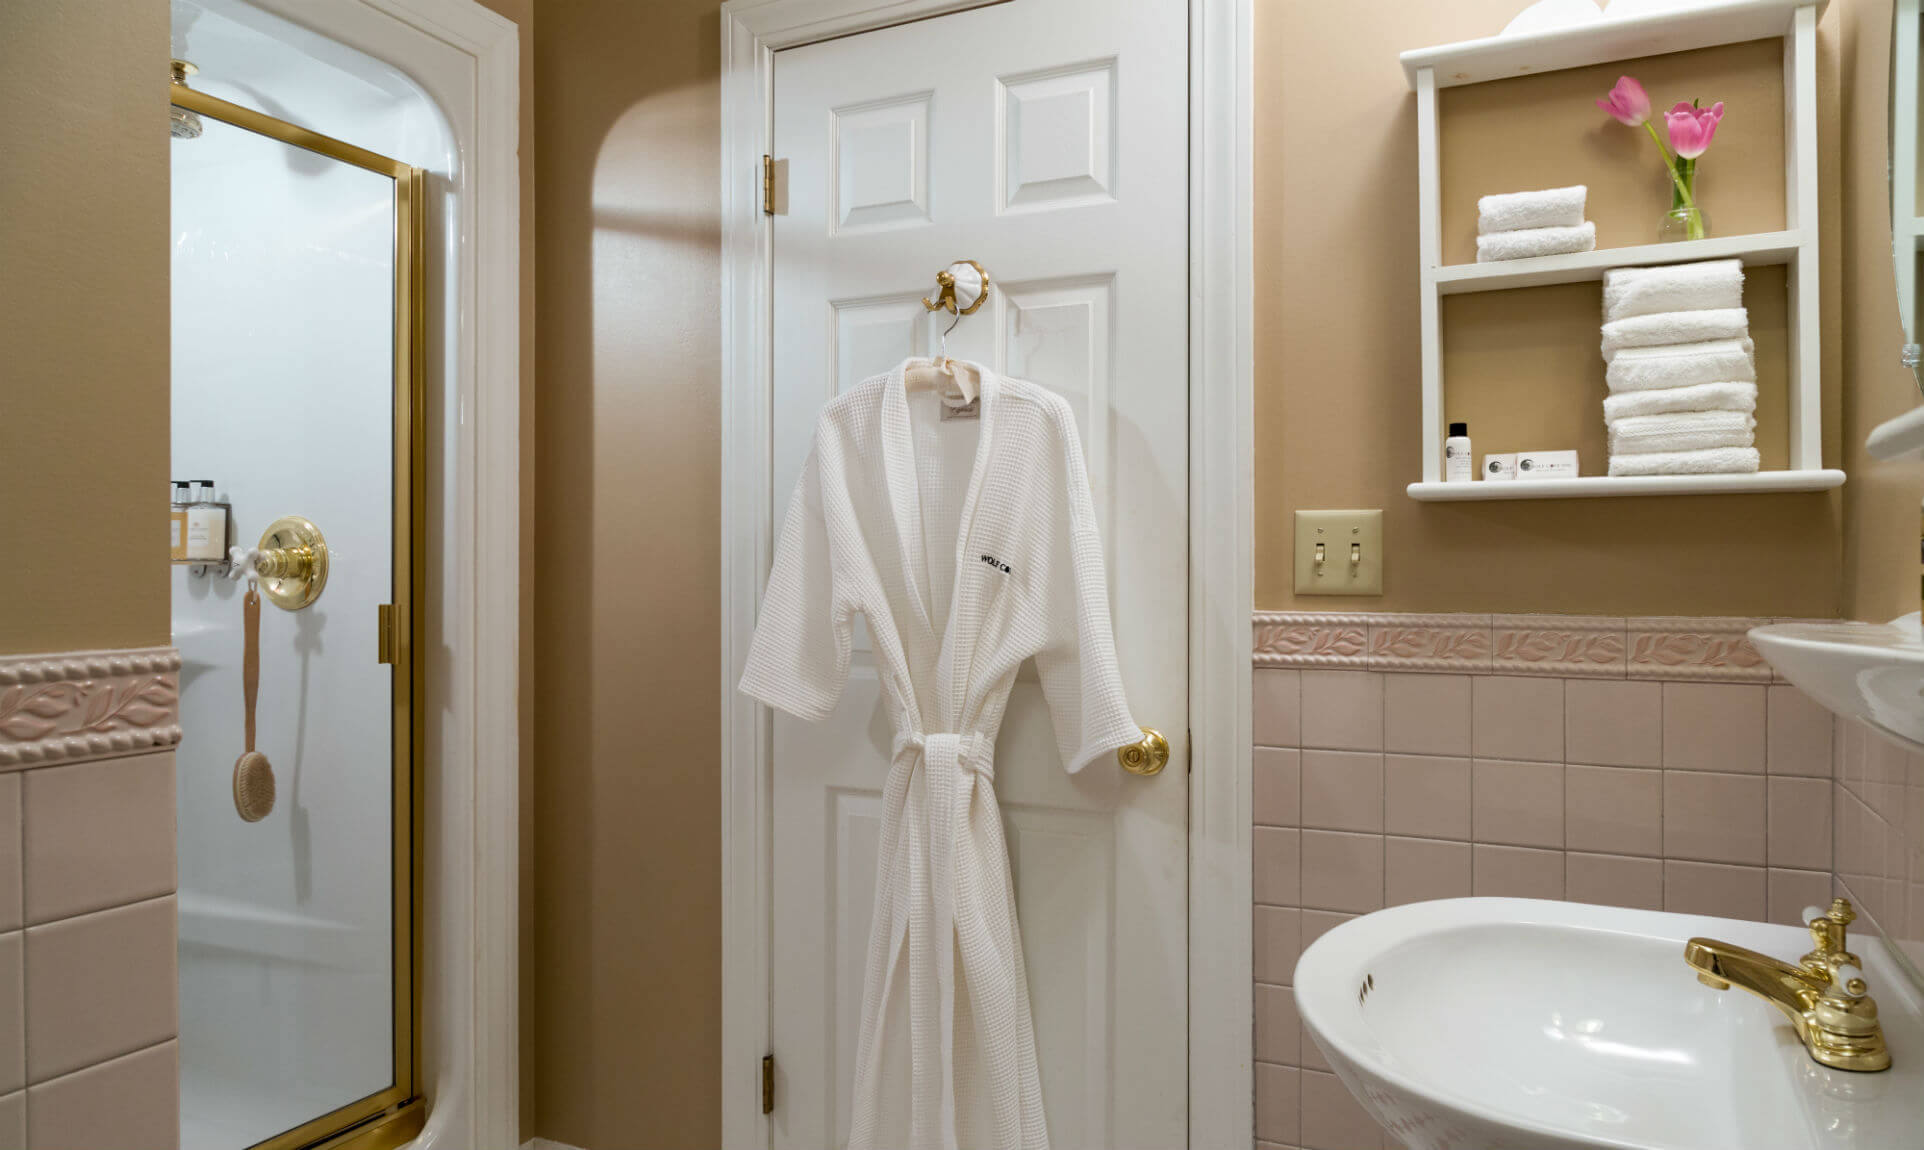 Soft bathrobe next to shower and sink in the Penobscot Bay room